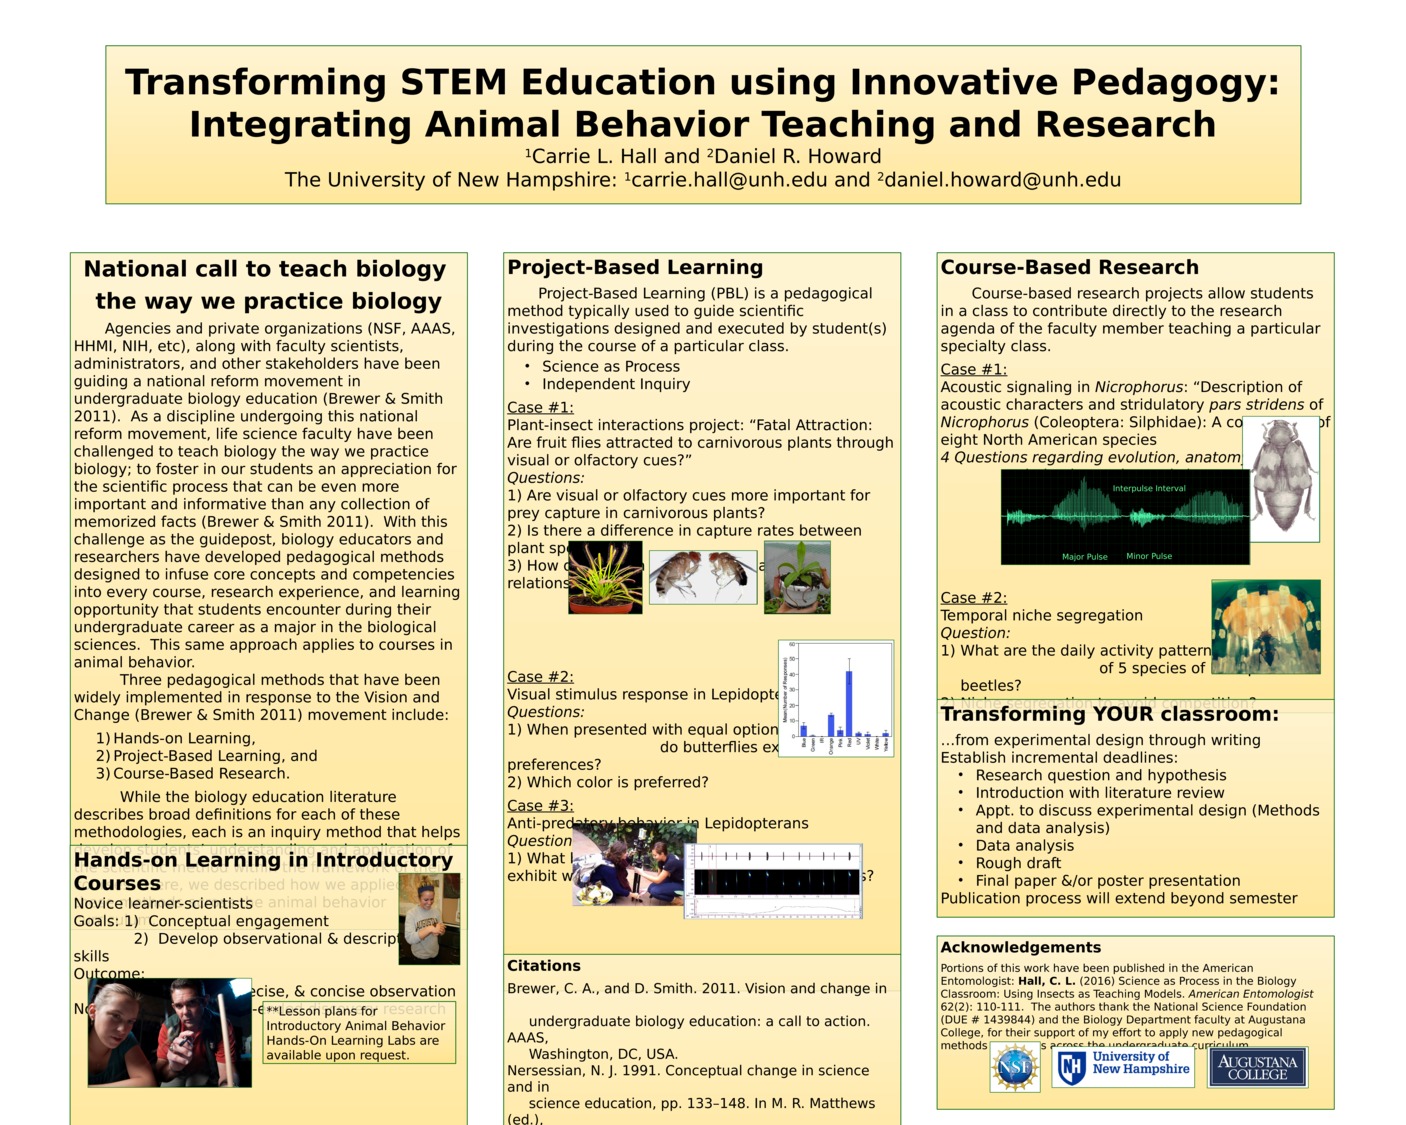 Transforming Stem Education Using Innovative Pedagogy: Integrating Animal Behavior Teaching And Research by drh1011